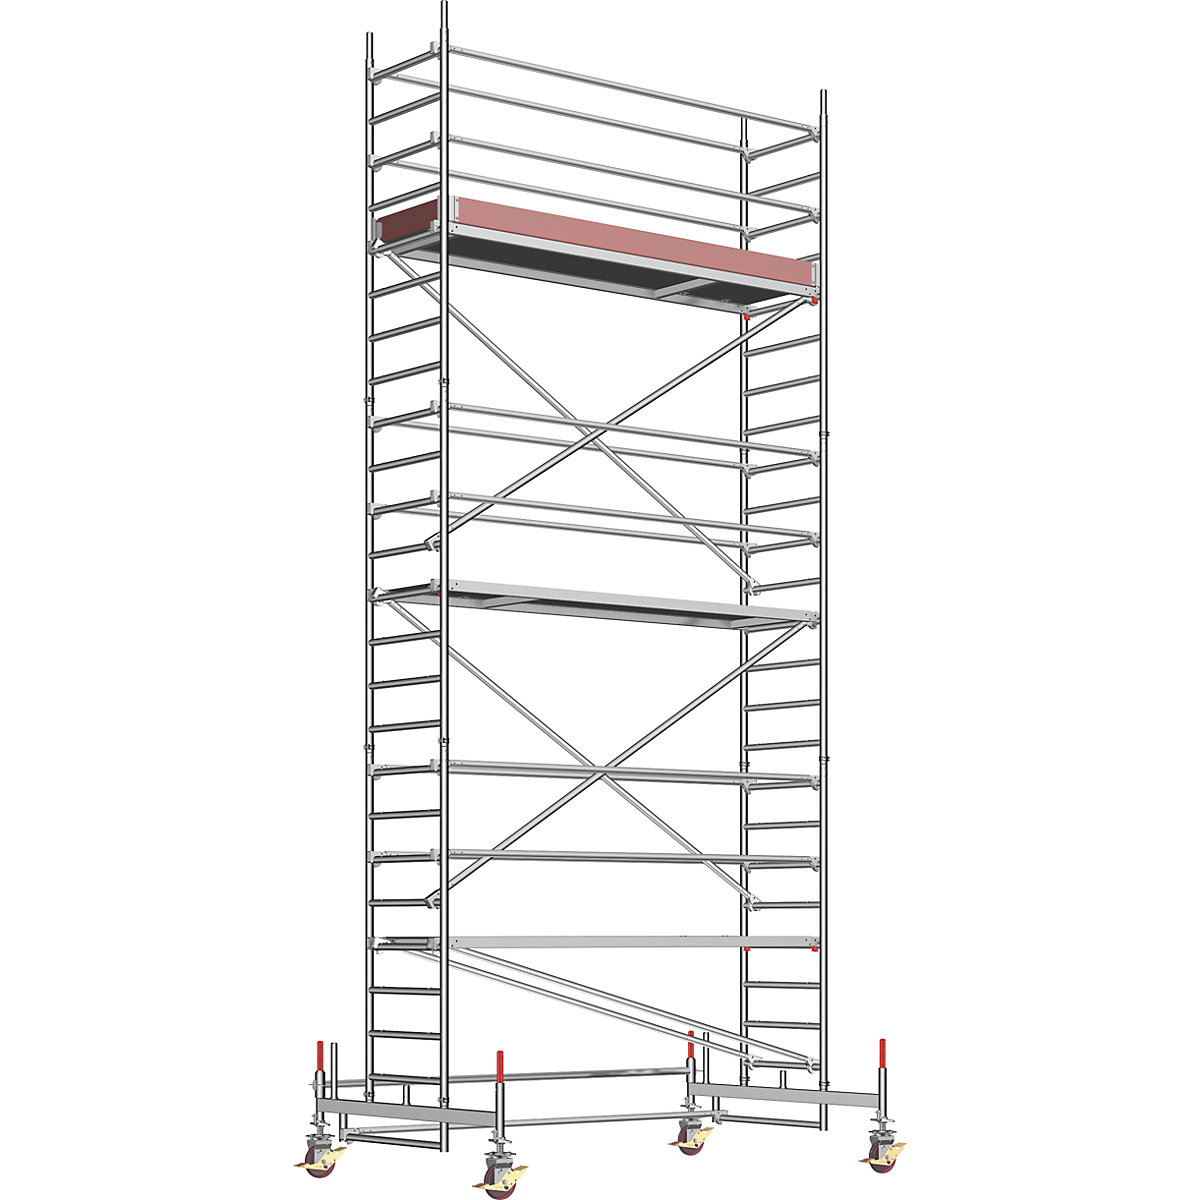 Universal mobile access tower – Layher, standard model, scaffolding height 6.58 m-10